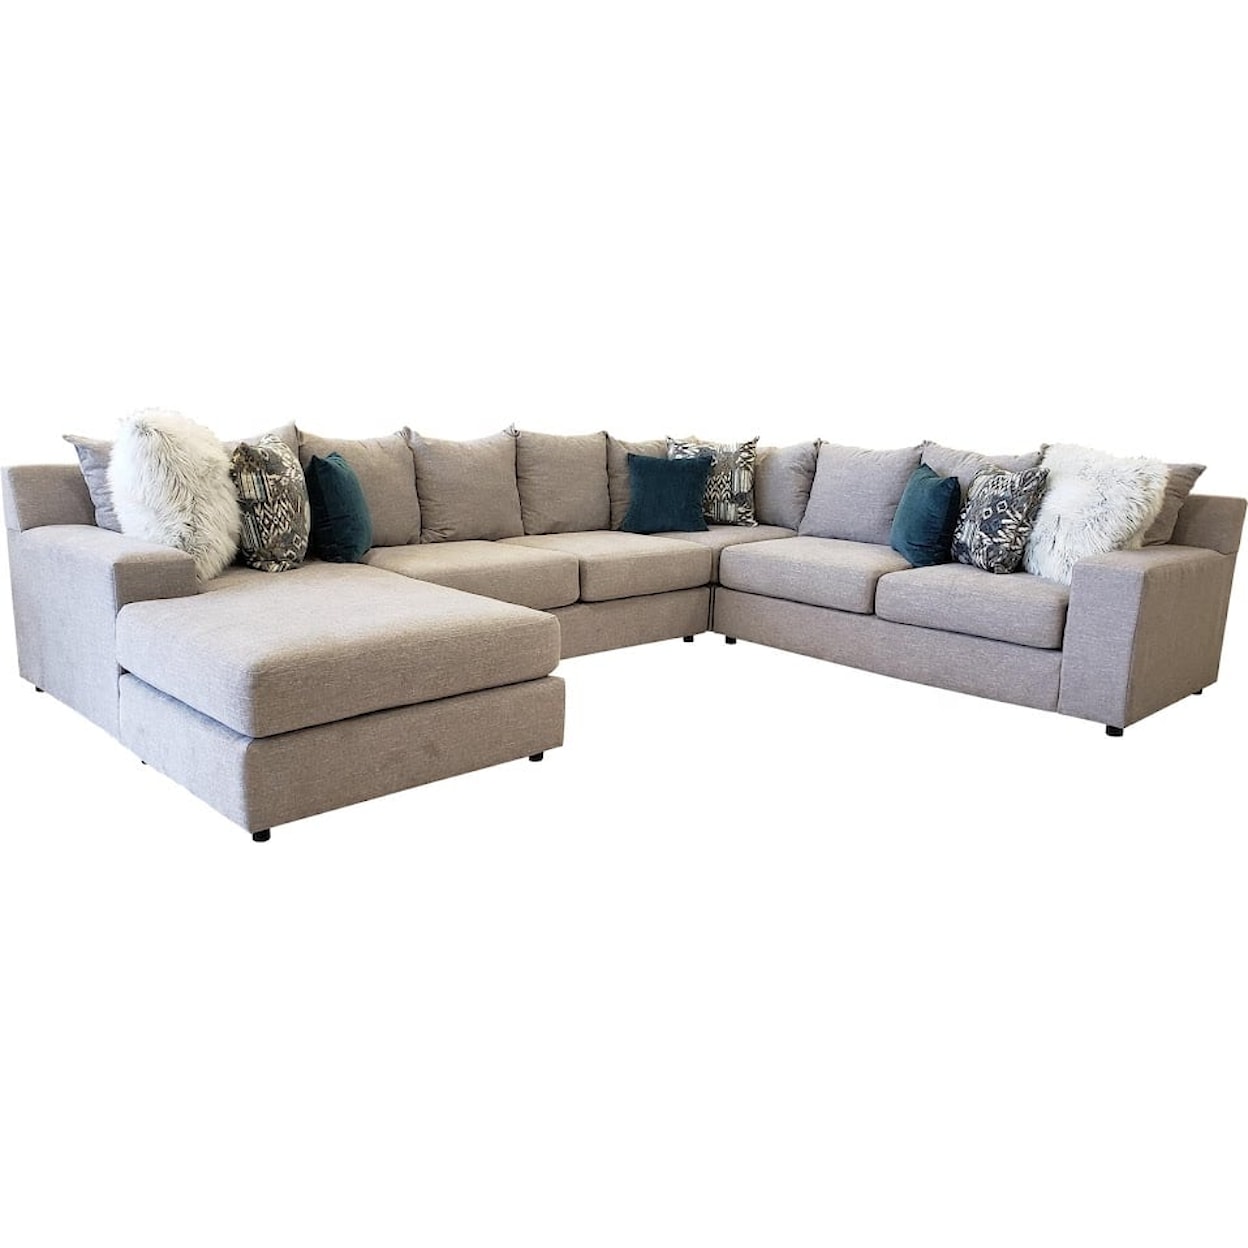 Phoenix Custom Furniture CASHMERE 4pc Large Sectional LAF Chaise